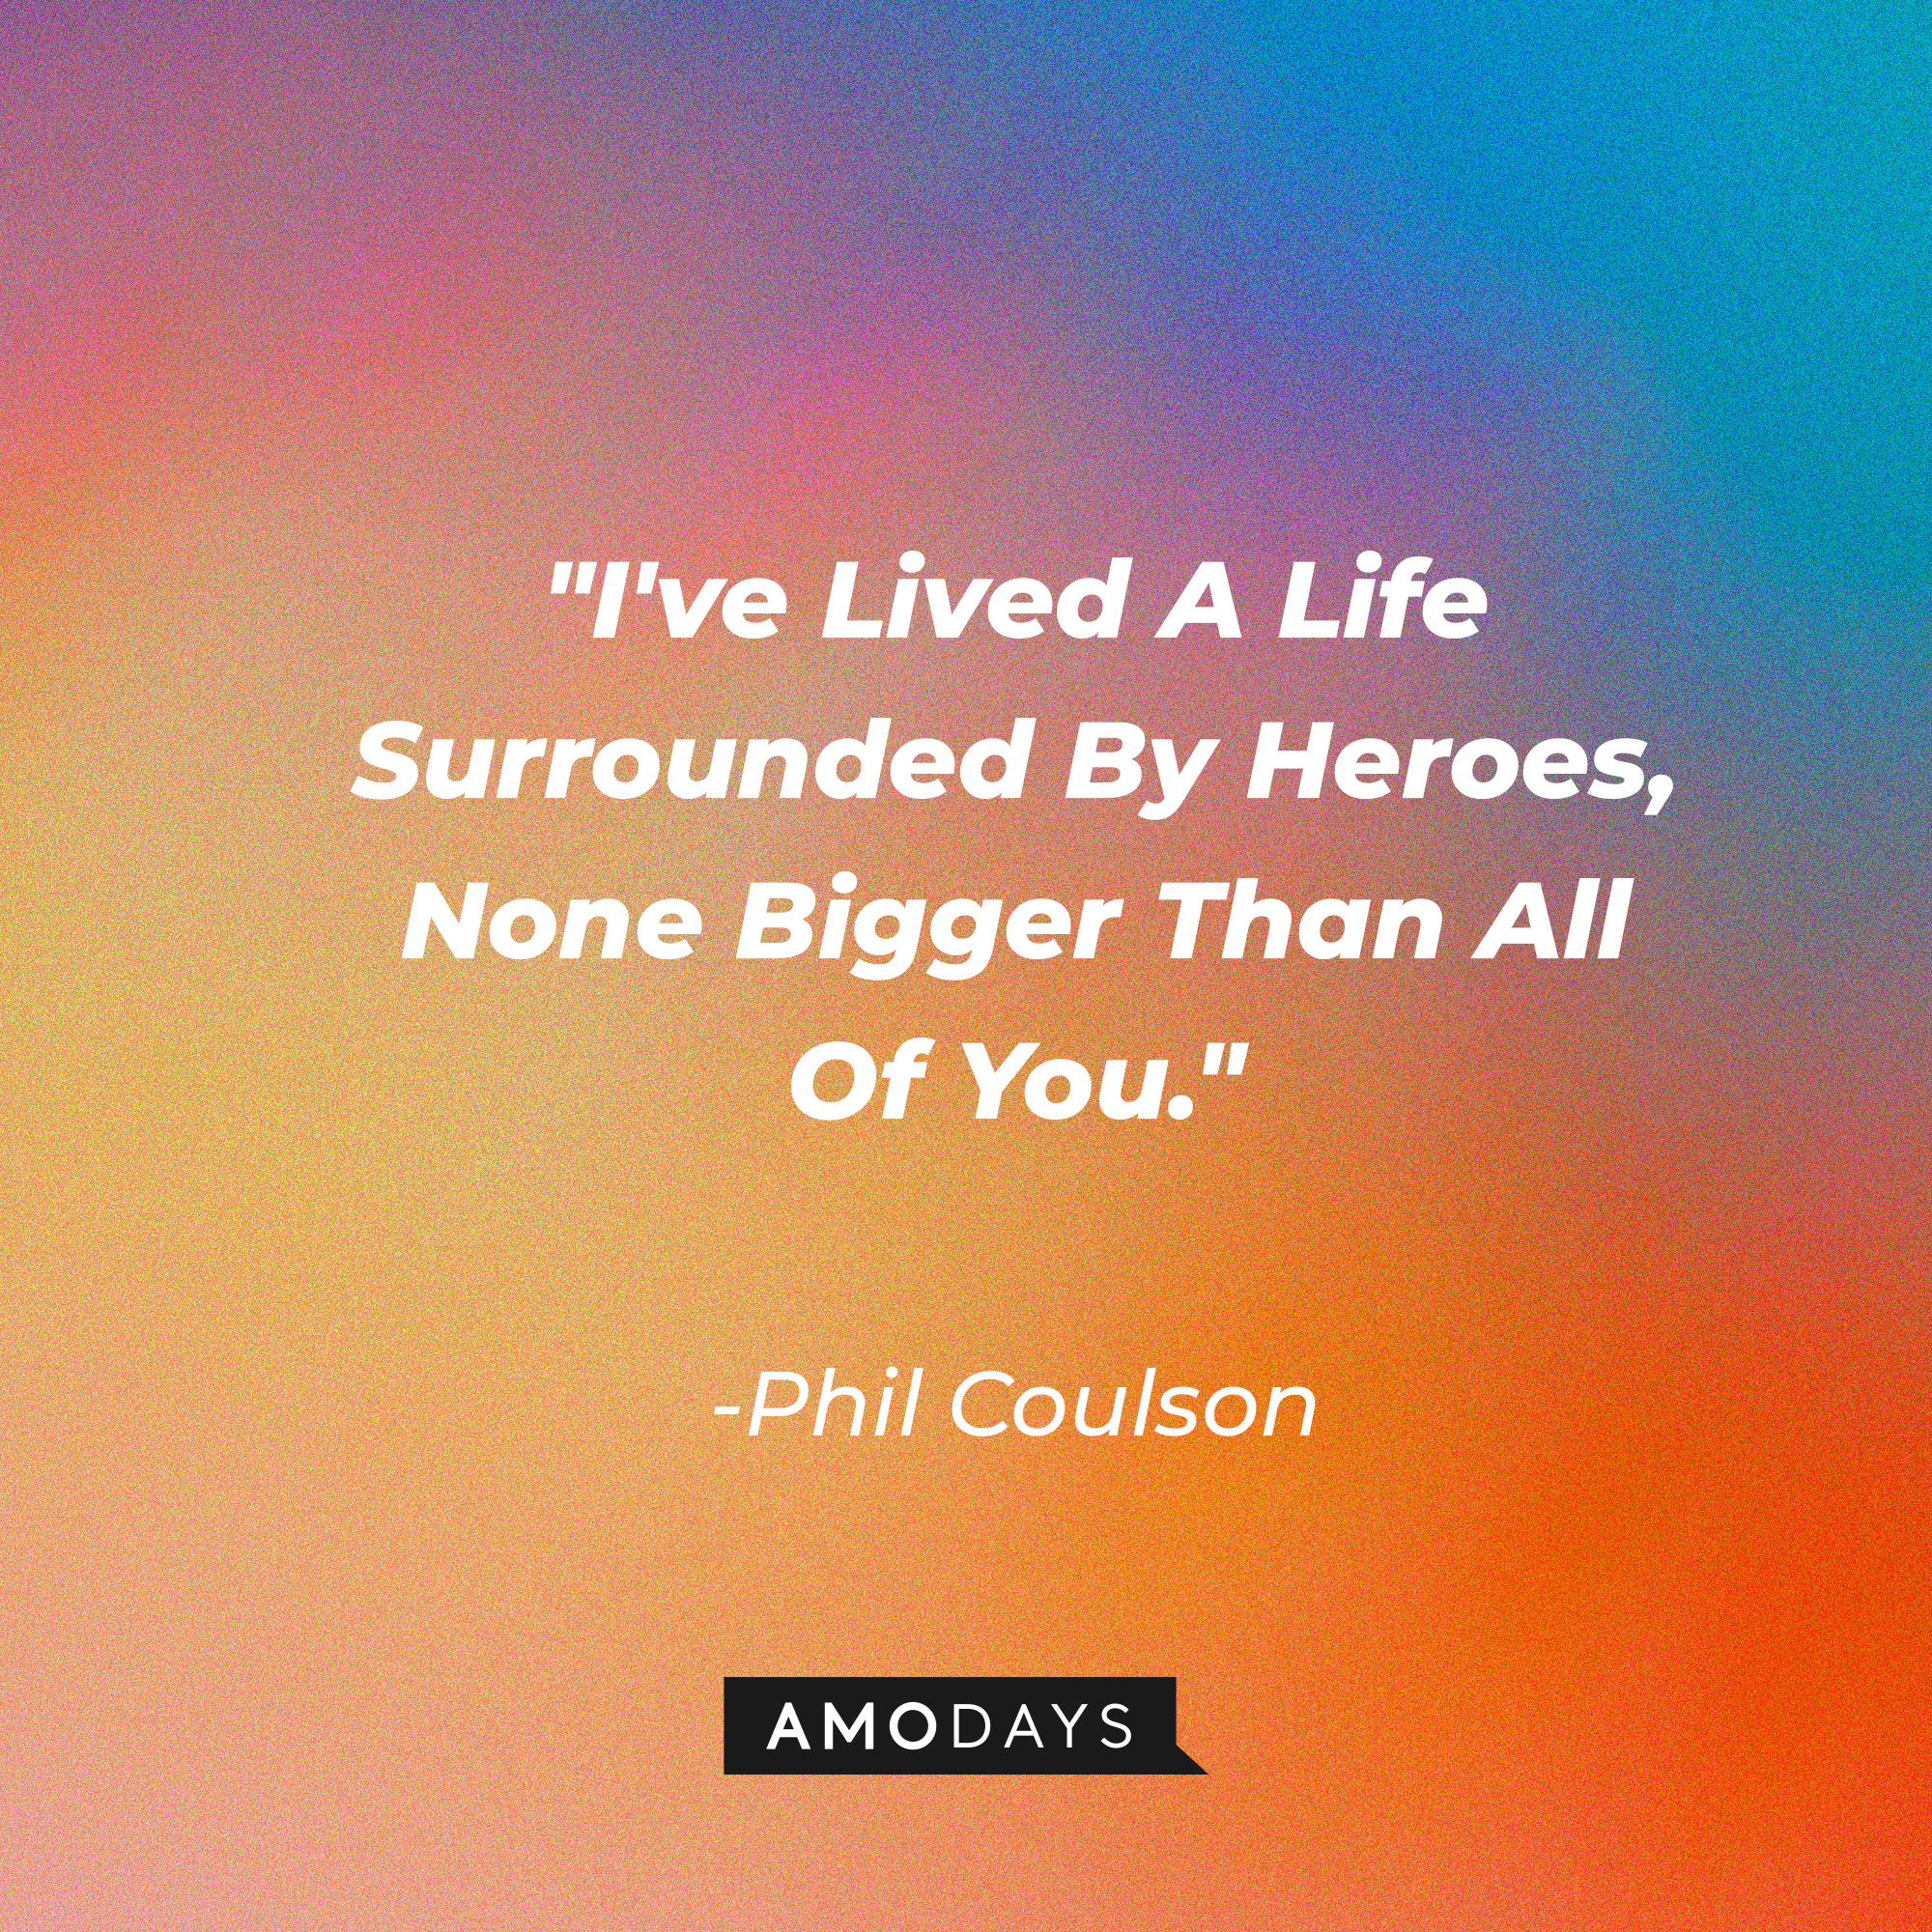 Phil Coulson's quote: "I've Lived A Life Surrounded By Heroes, None Bigger Than All Of You." | Source: Amodays